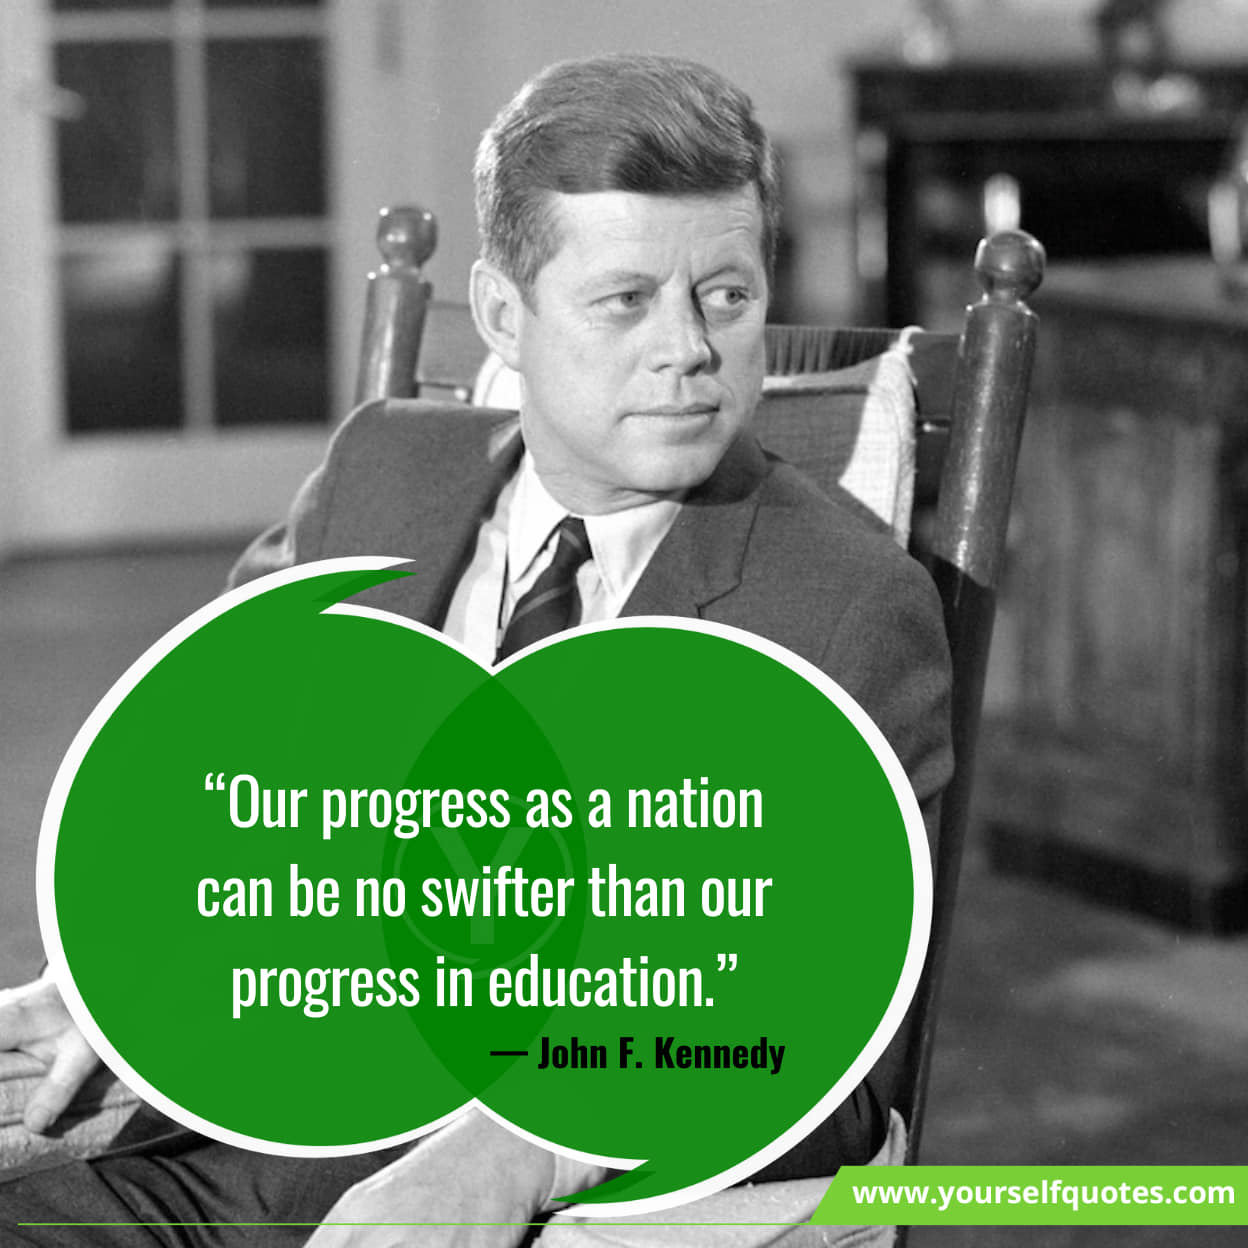 Inspirational quotes by John F. Kennedy